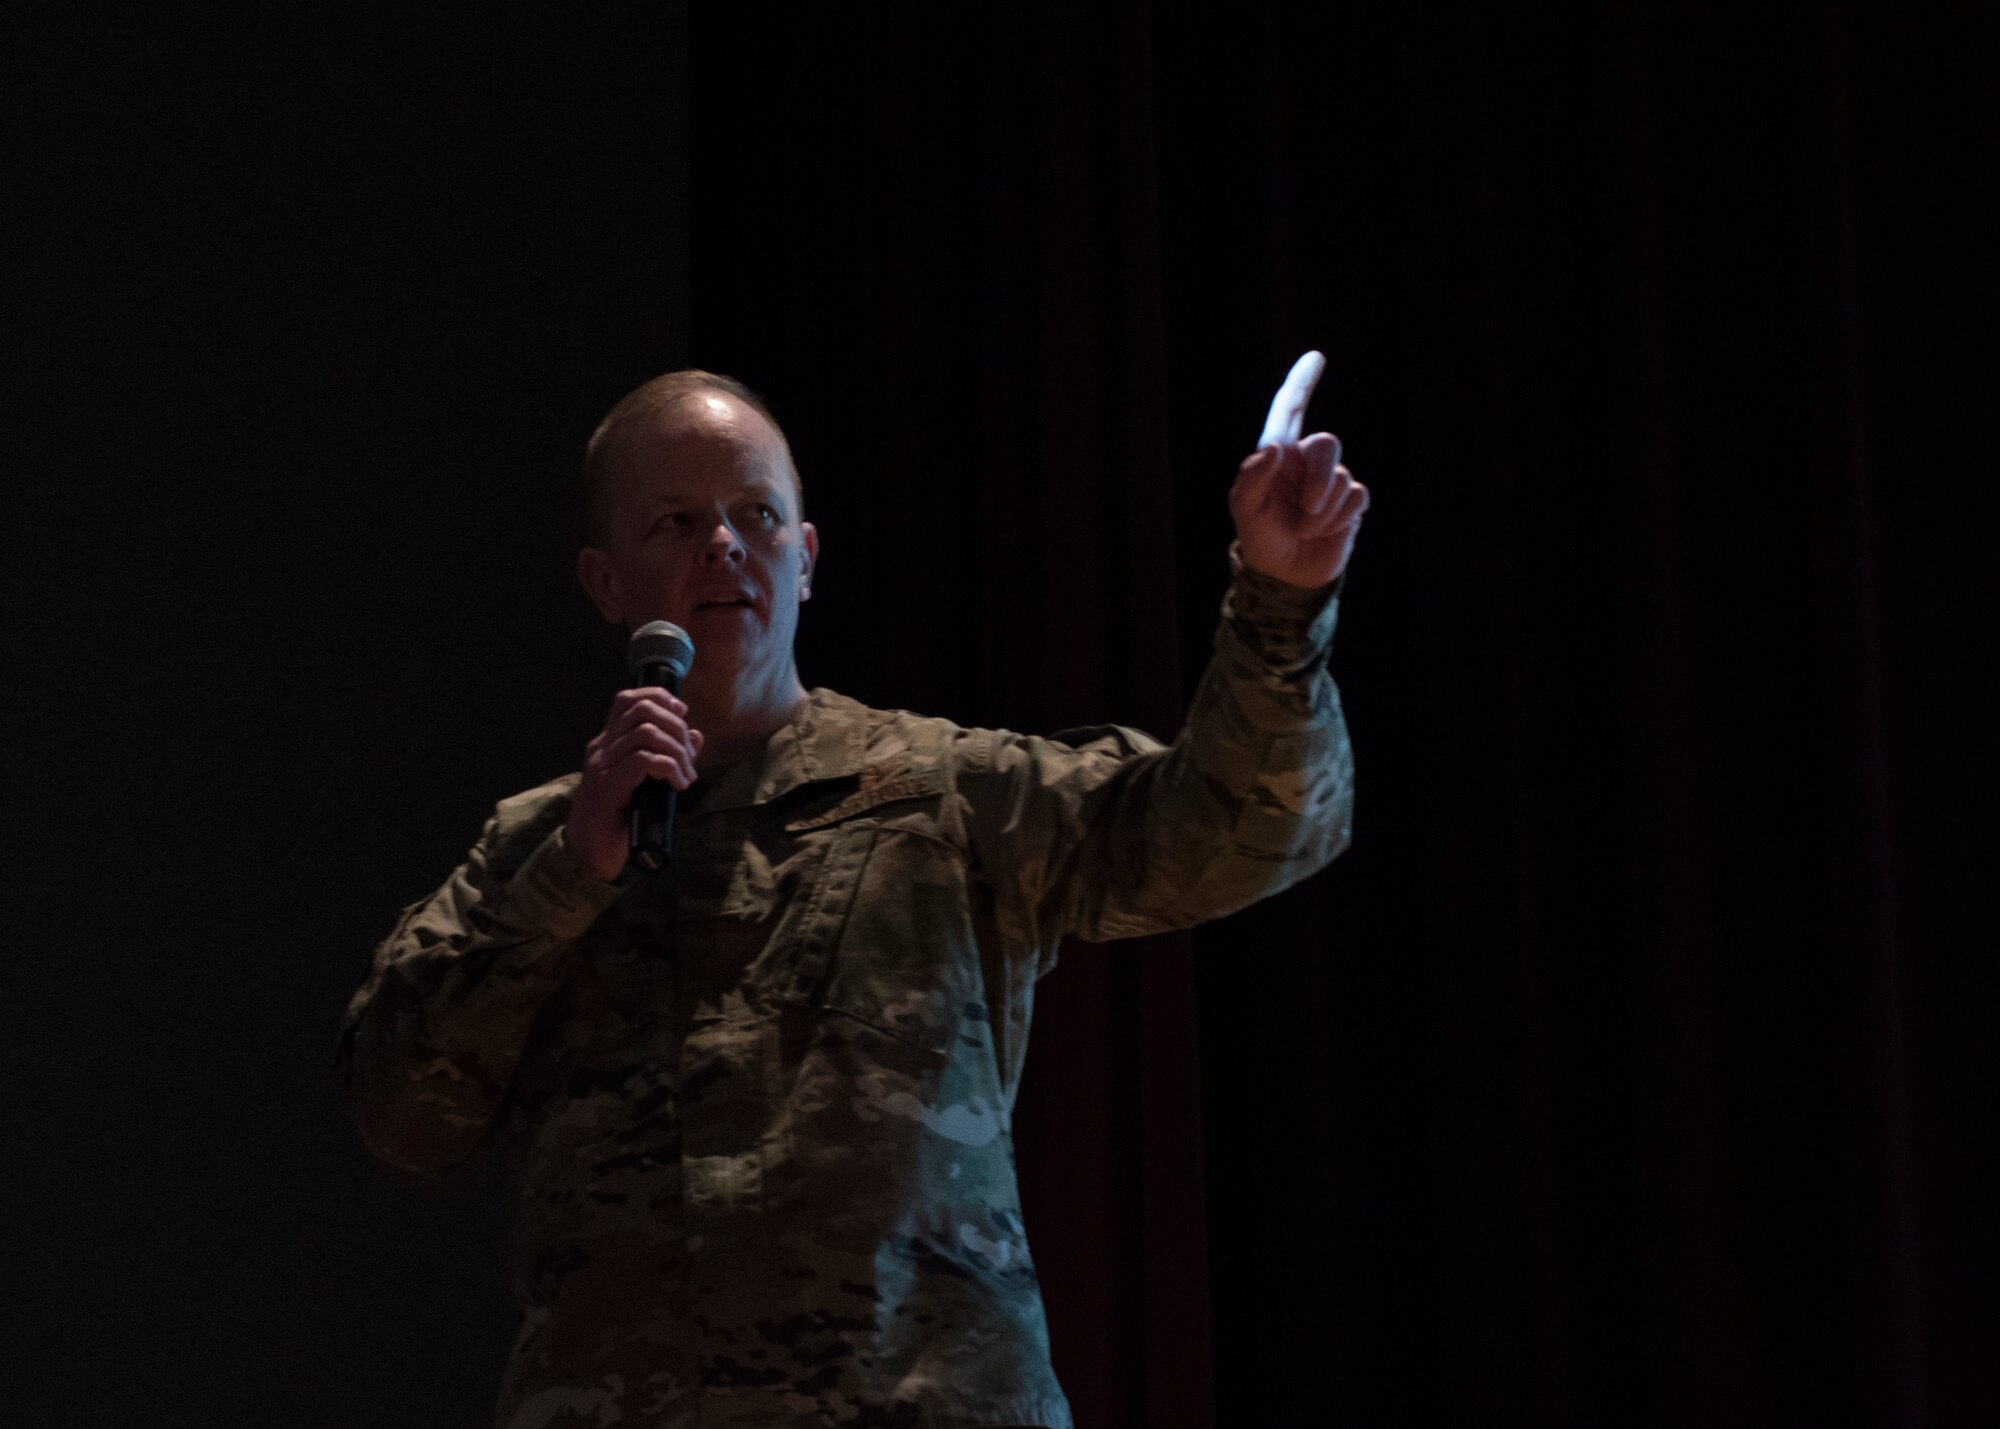 Col. Derek Salmi, 92nd Air Refueling Wing commander, points out details on a presentation during an all-call meeting at Fairchild Air Force Base, Washington, Jan. 15, 2020. Salmi highlighted the numerous accomplishments of Team Fairchild in 2019 to include: the reactivation of the 97th Air Refueling Squadron, Mobility Guardian Exercise, Inland Northwest Skyfest, Leaders Inspiring For Tomorrow, Spark Tank innovation competition, Year of the Defender and the Green In ’19 initiative. (U.S. Air Force photo by Staff Sgt. Ryan Lackey)